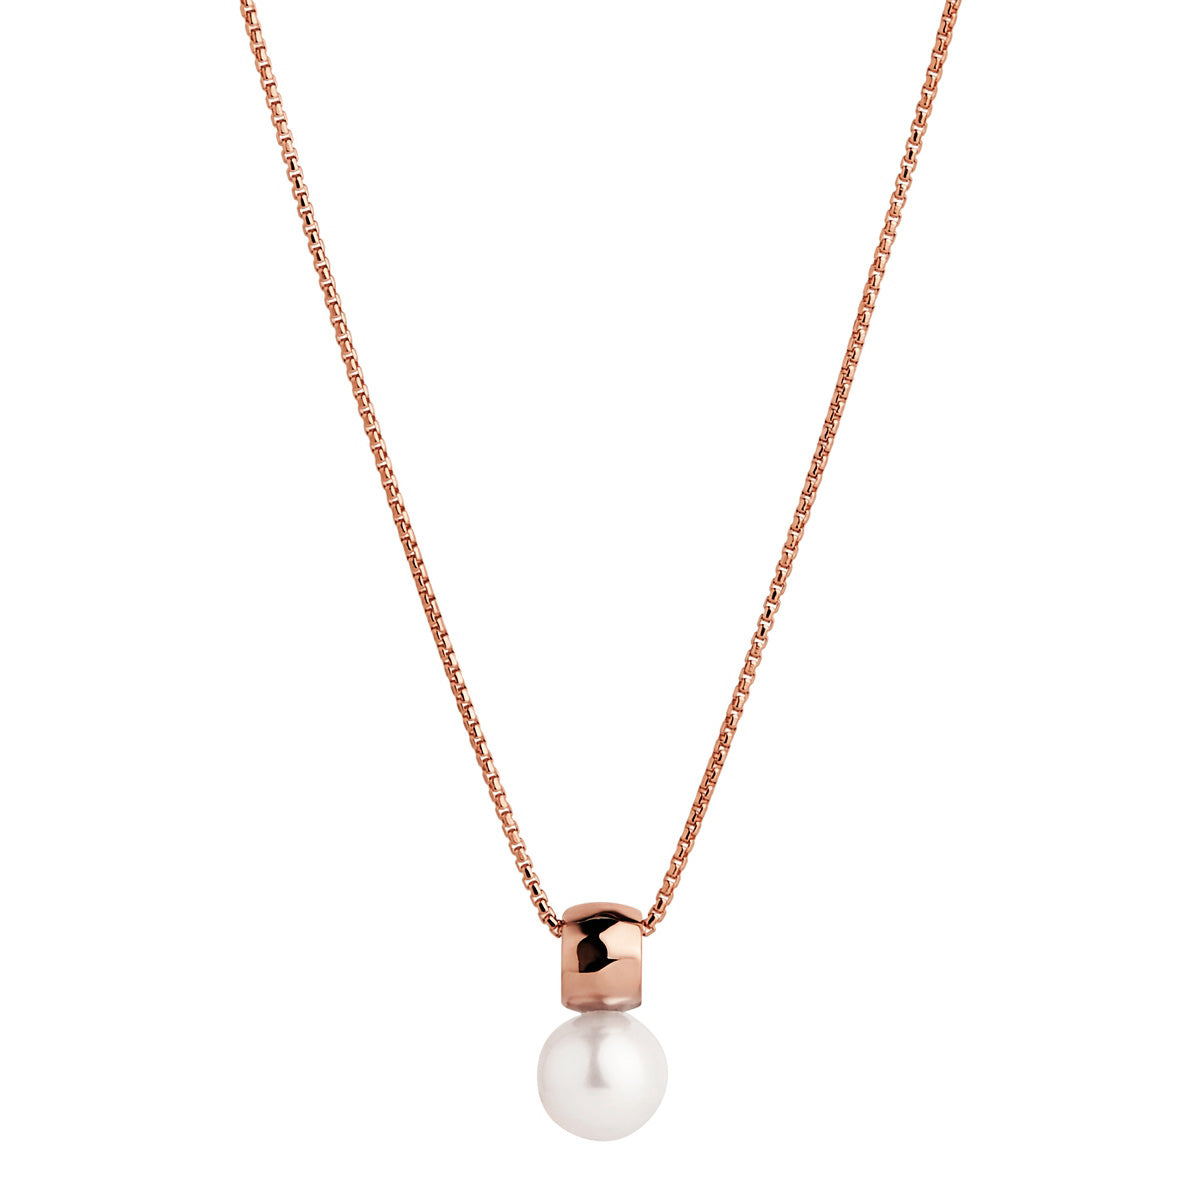 Idyll Rose Gold Pearl Necklace (45cm+ext)